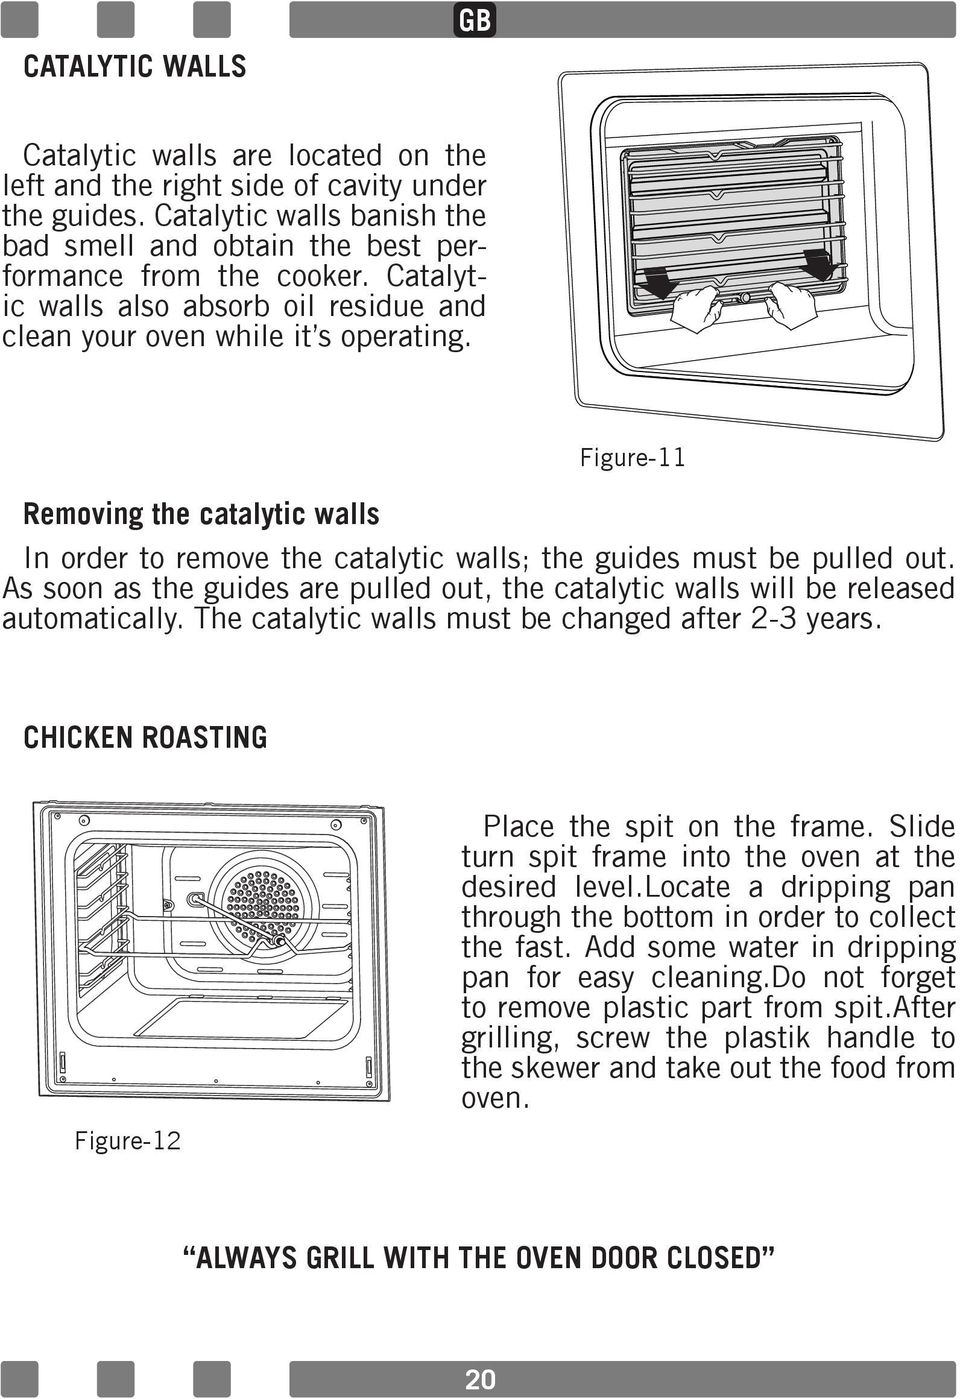 As soon as the guides are pulled out, the catalytic walls will be released automatically. The catalytic walls must be changed after 2-3 years. CHICKEN ROASTING Figure-12 Place the spit on the frame.